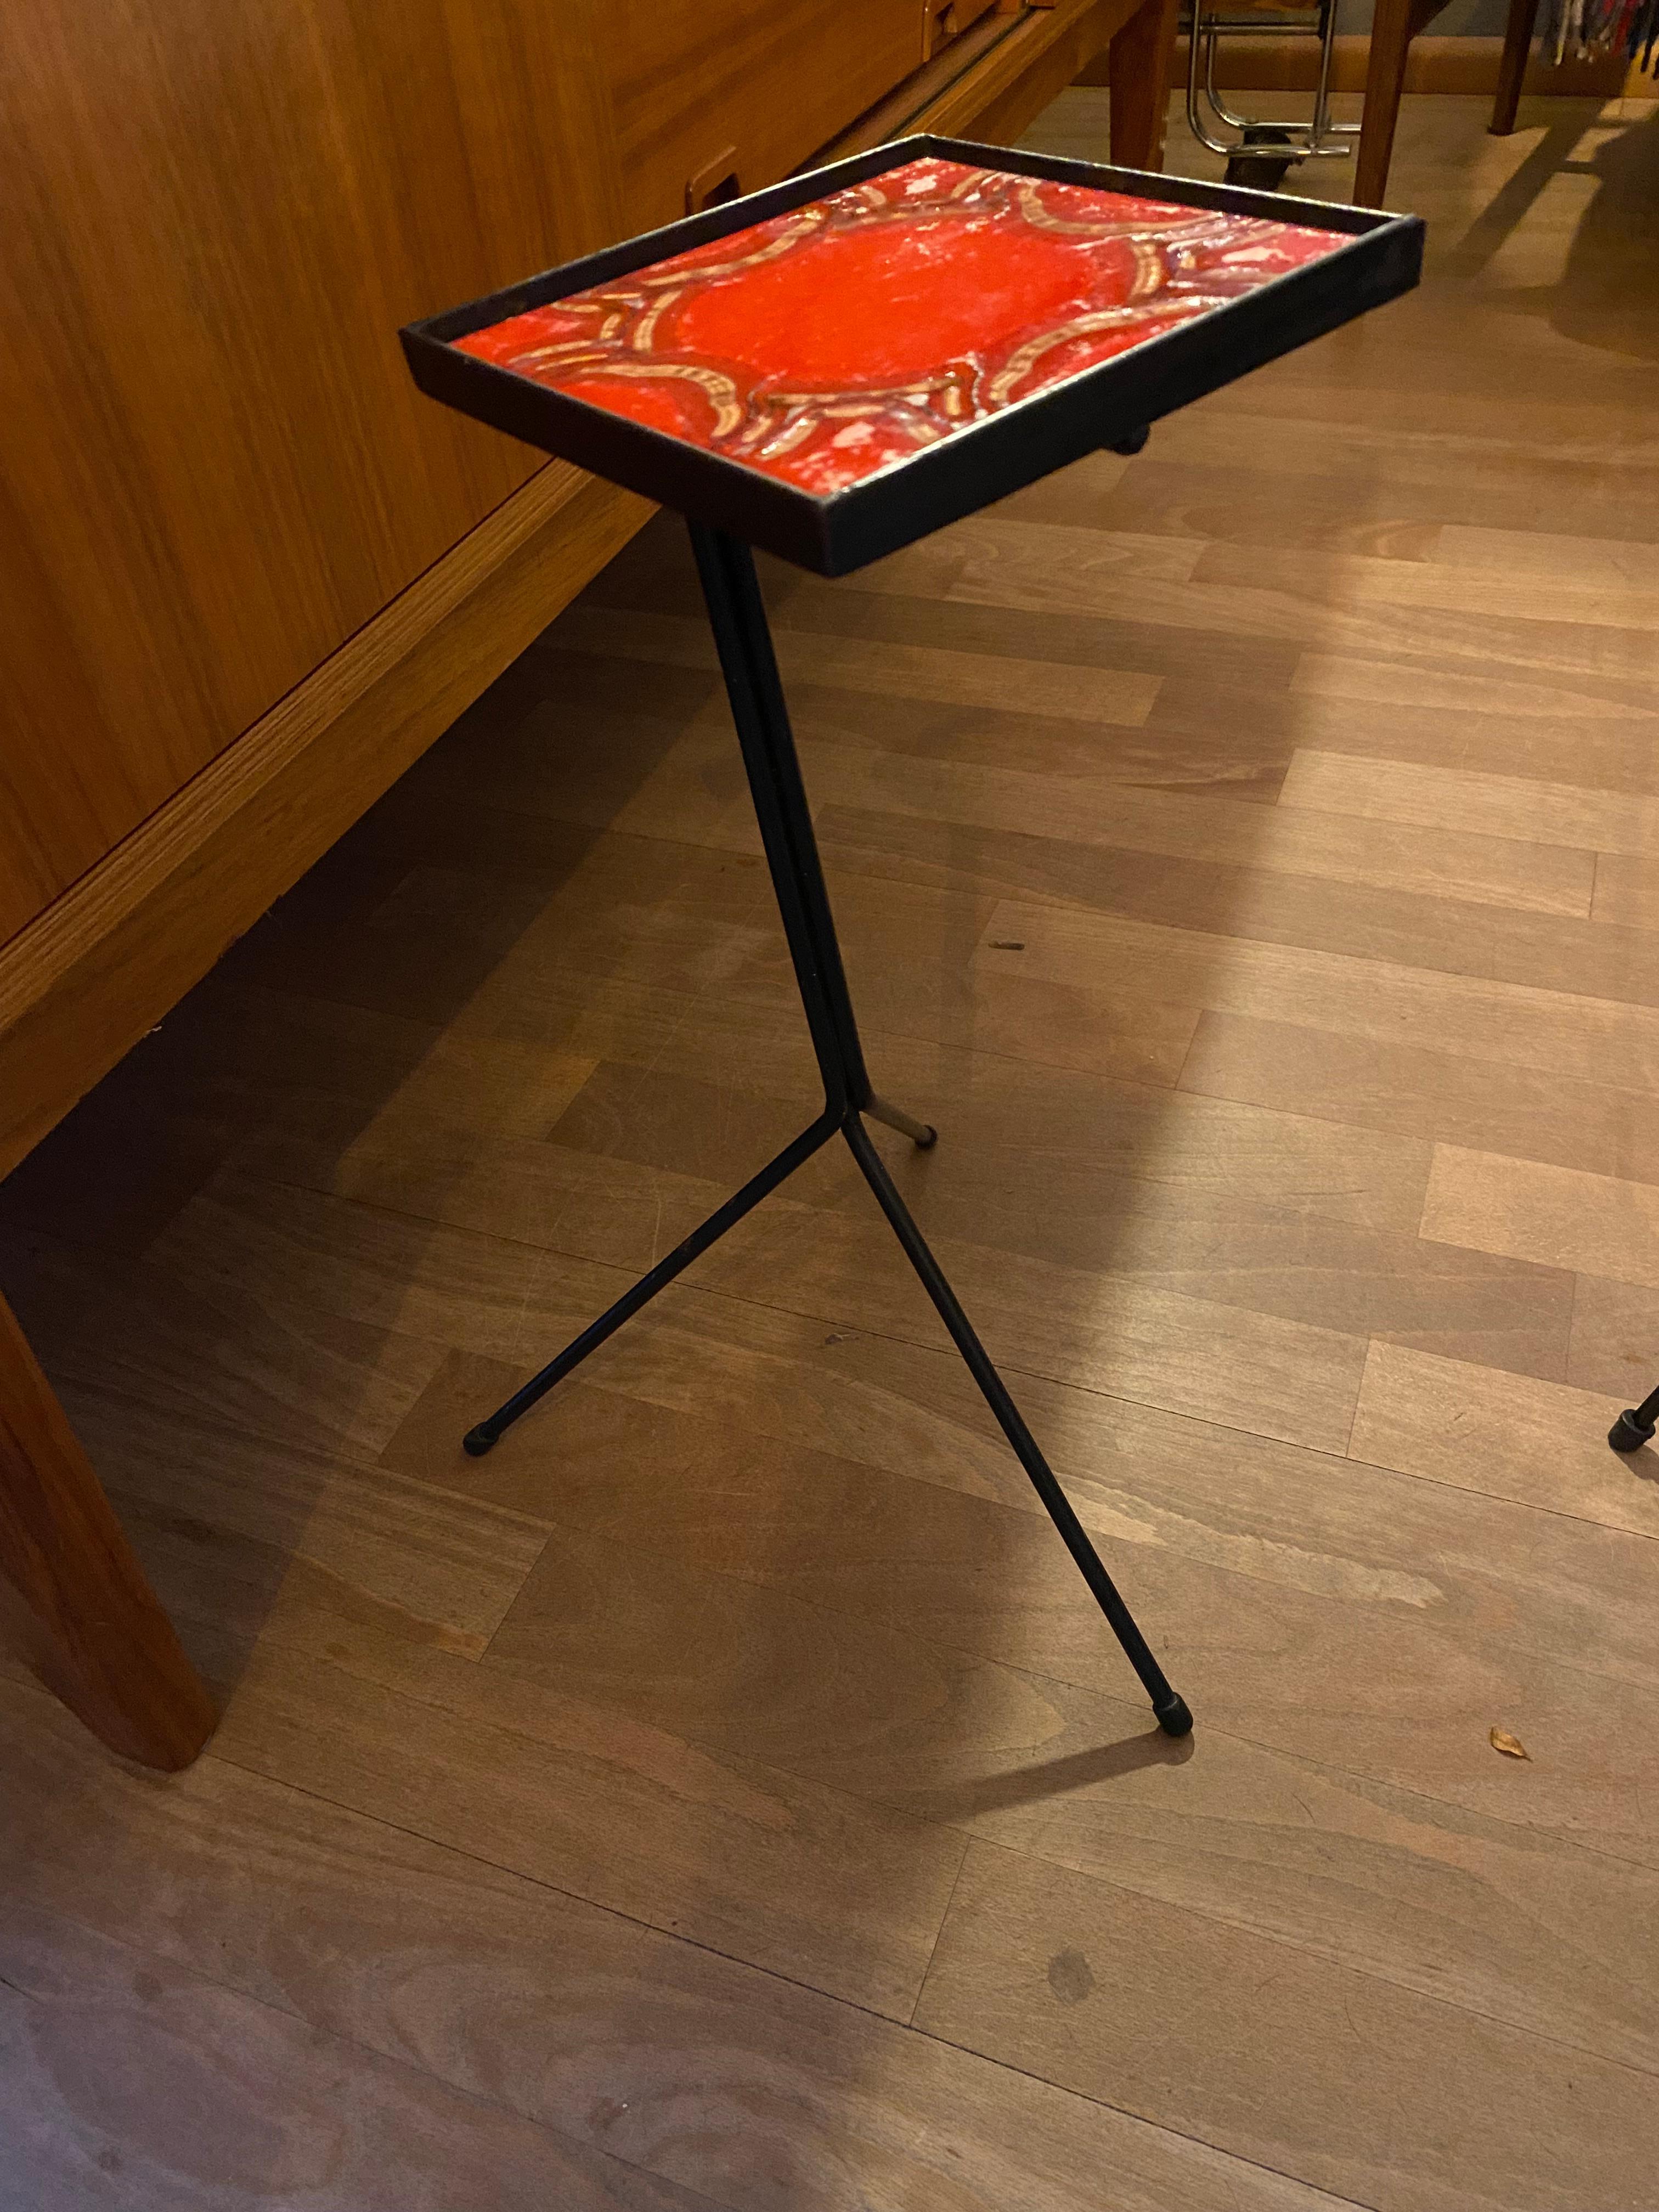 A small fifties/sixties tripod side table with vibrant tile.
The tile measures 16 x 16 cm

Nice for a quick to grab side table for your cup of coffee. It can also be used as a plant table.